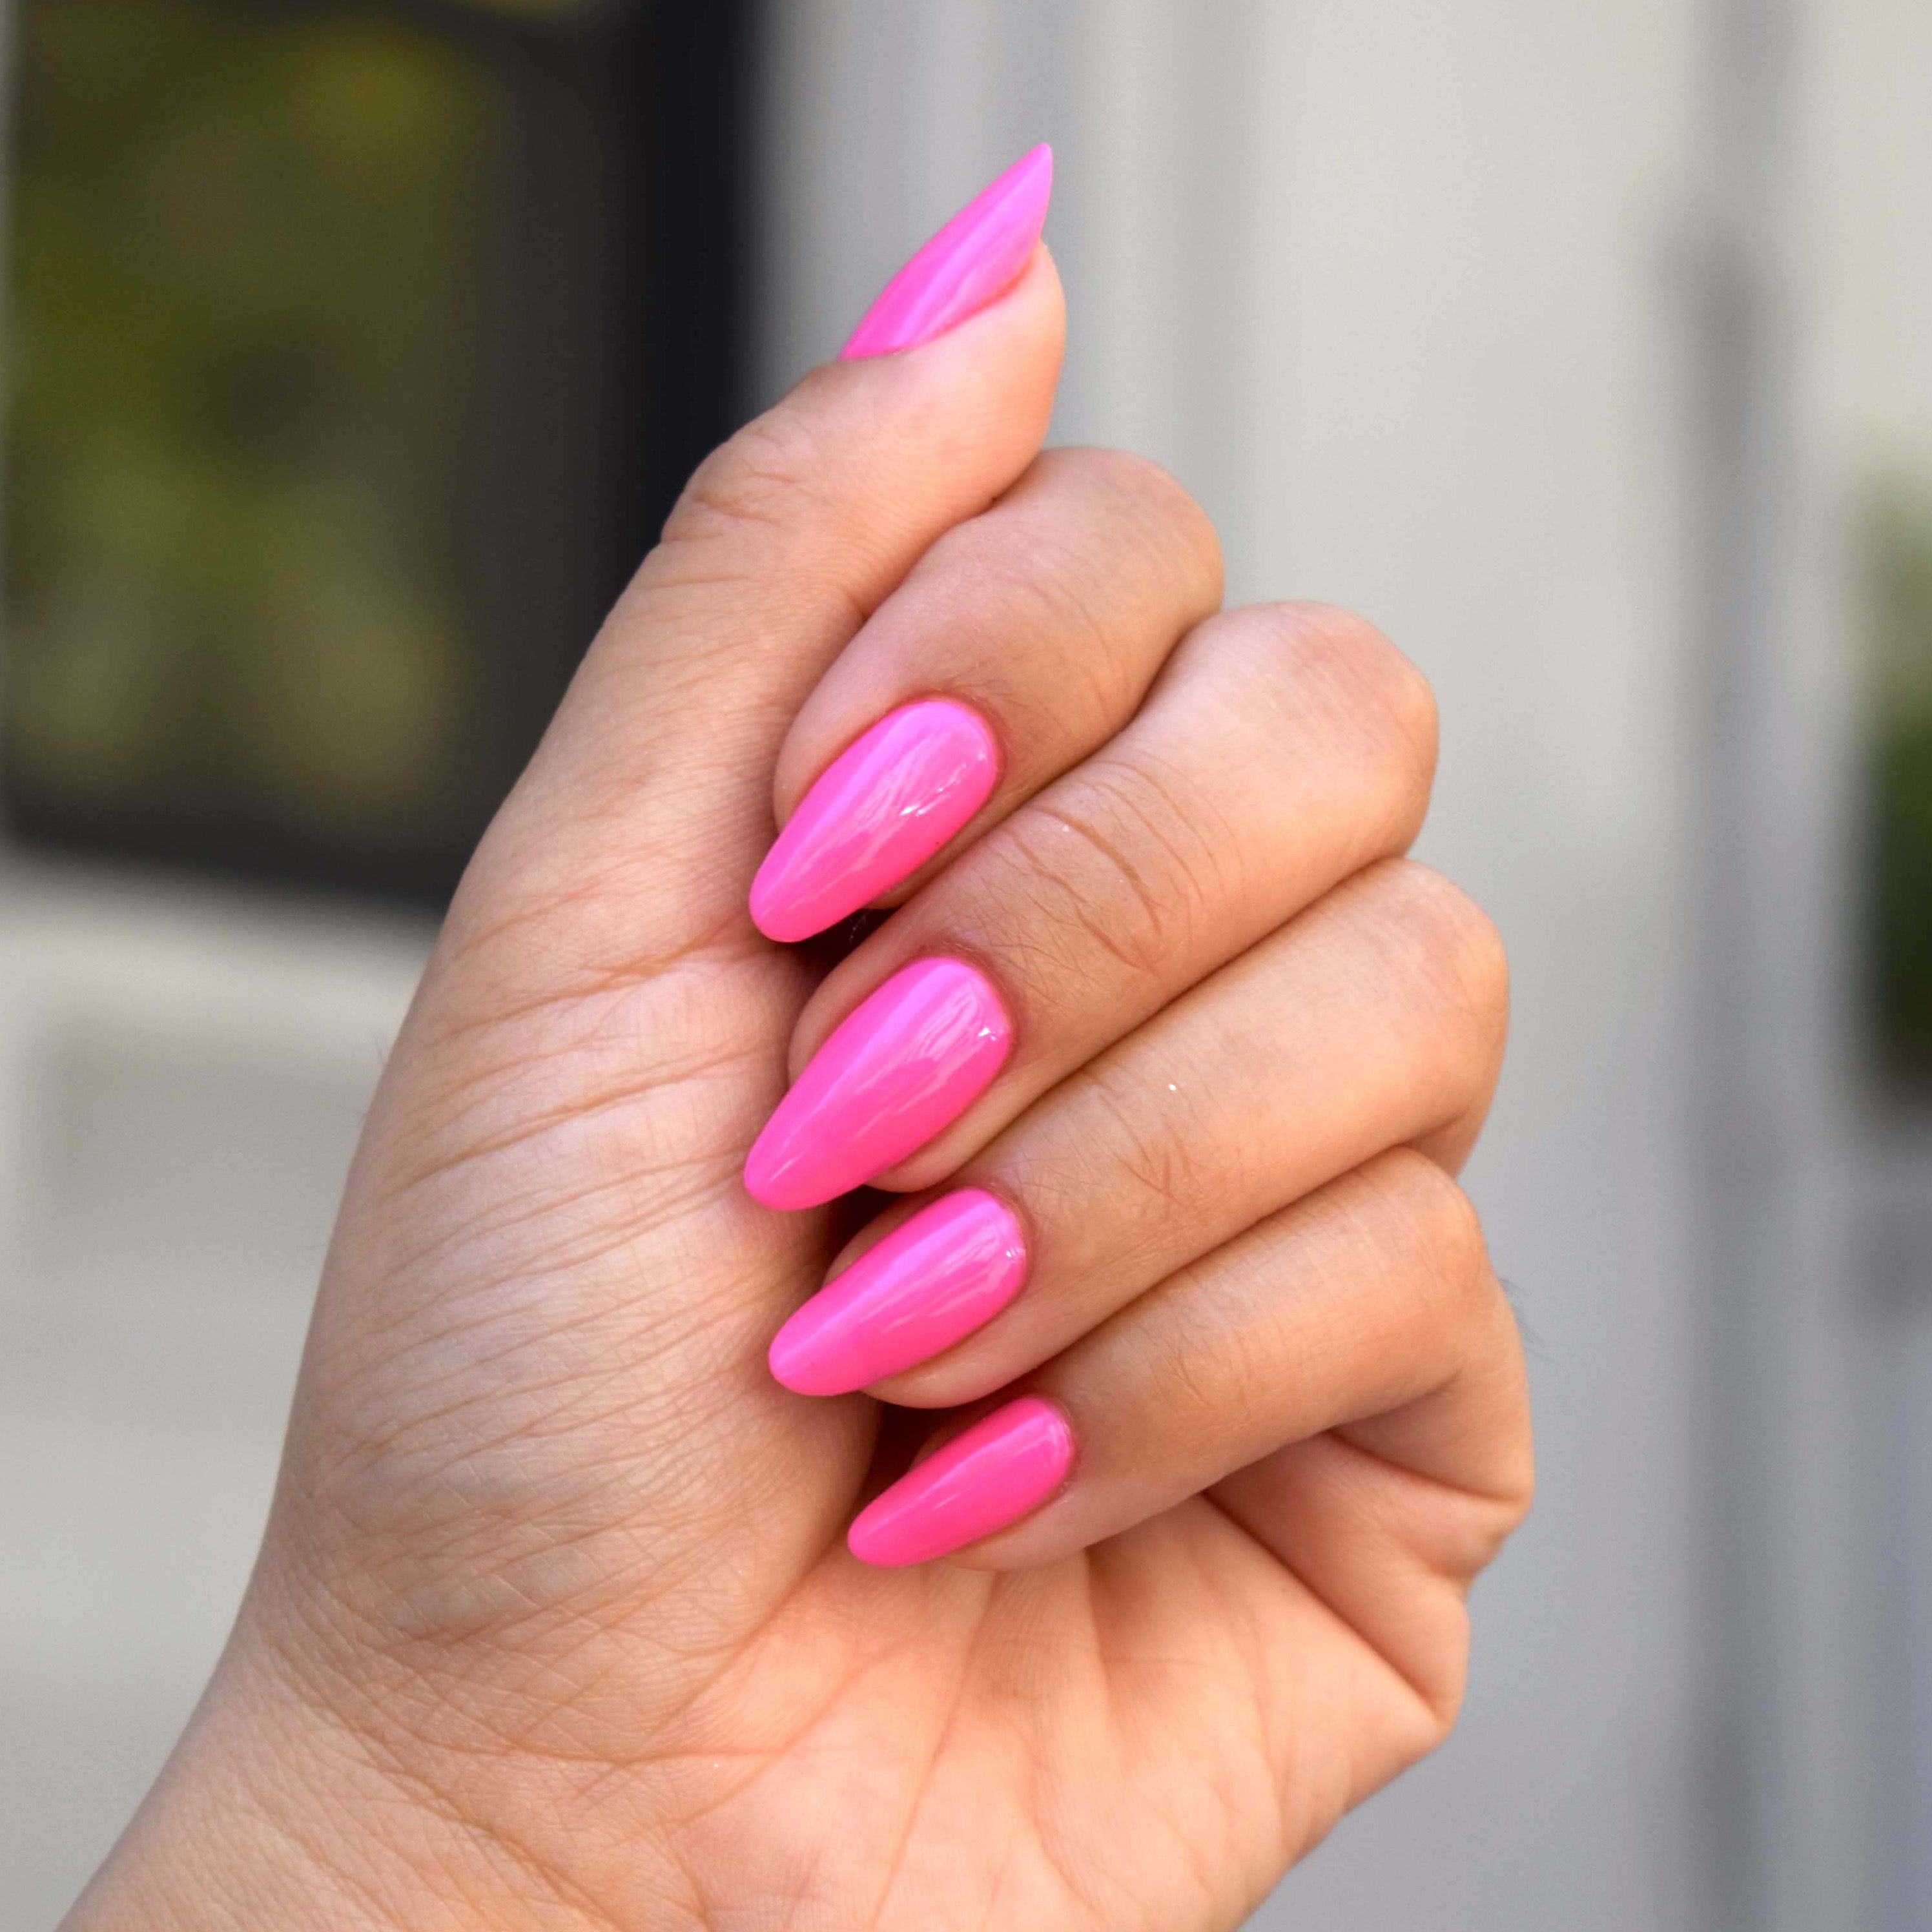 JAS BEAUTY Absolute Gel Stylist Nail Color -Hot Pink (10 ml) HOT PINK -  Price in India, Buy JAS BEAUTY Absolute Gel Stylist Nail Color -Hot Pink  (10 ml) HOT PINK Online